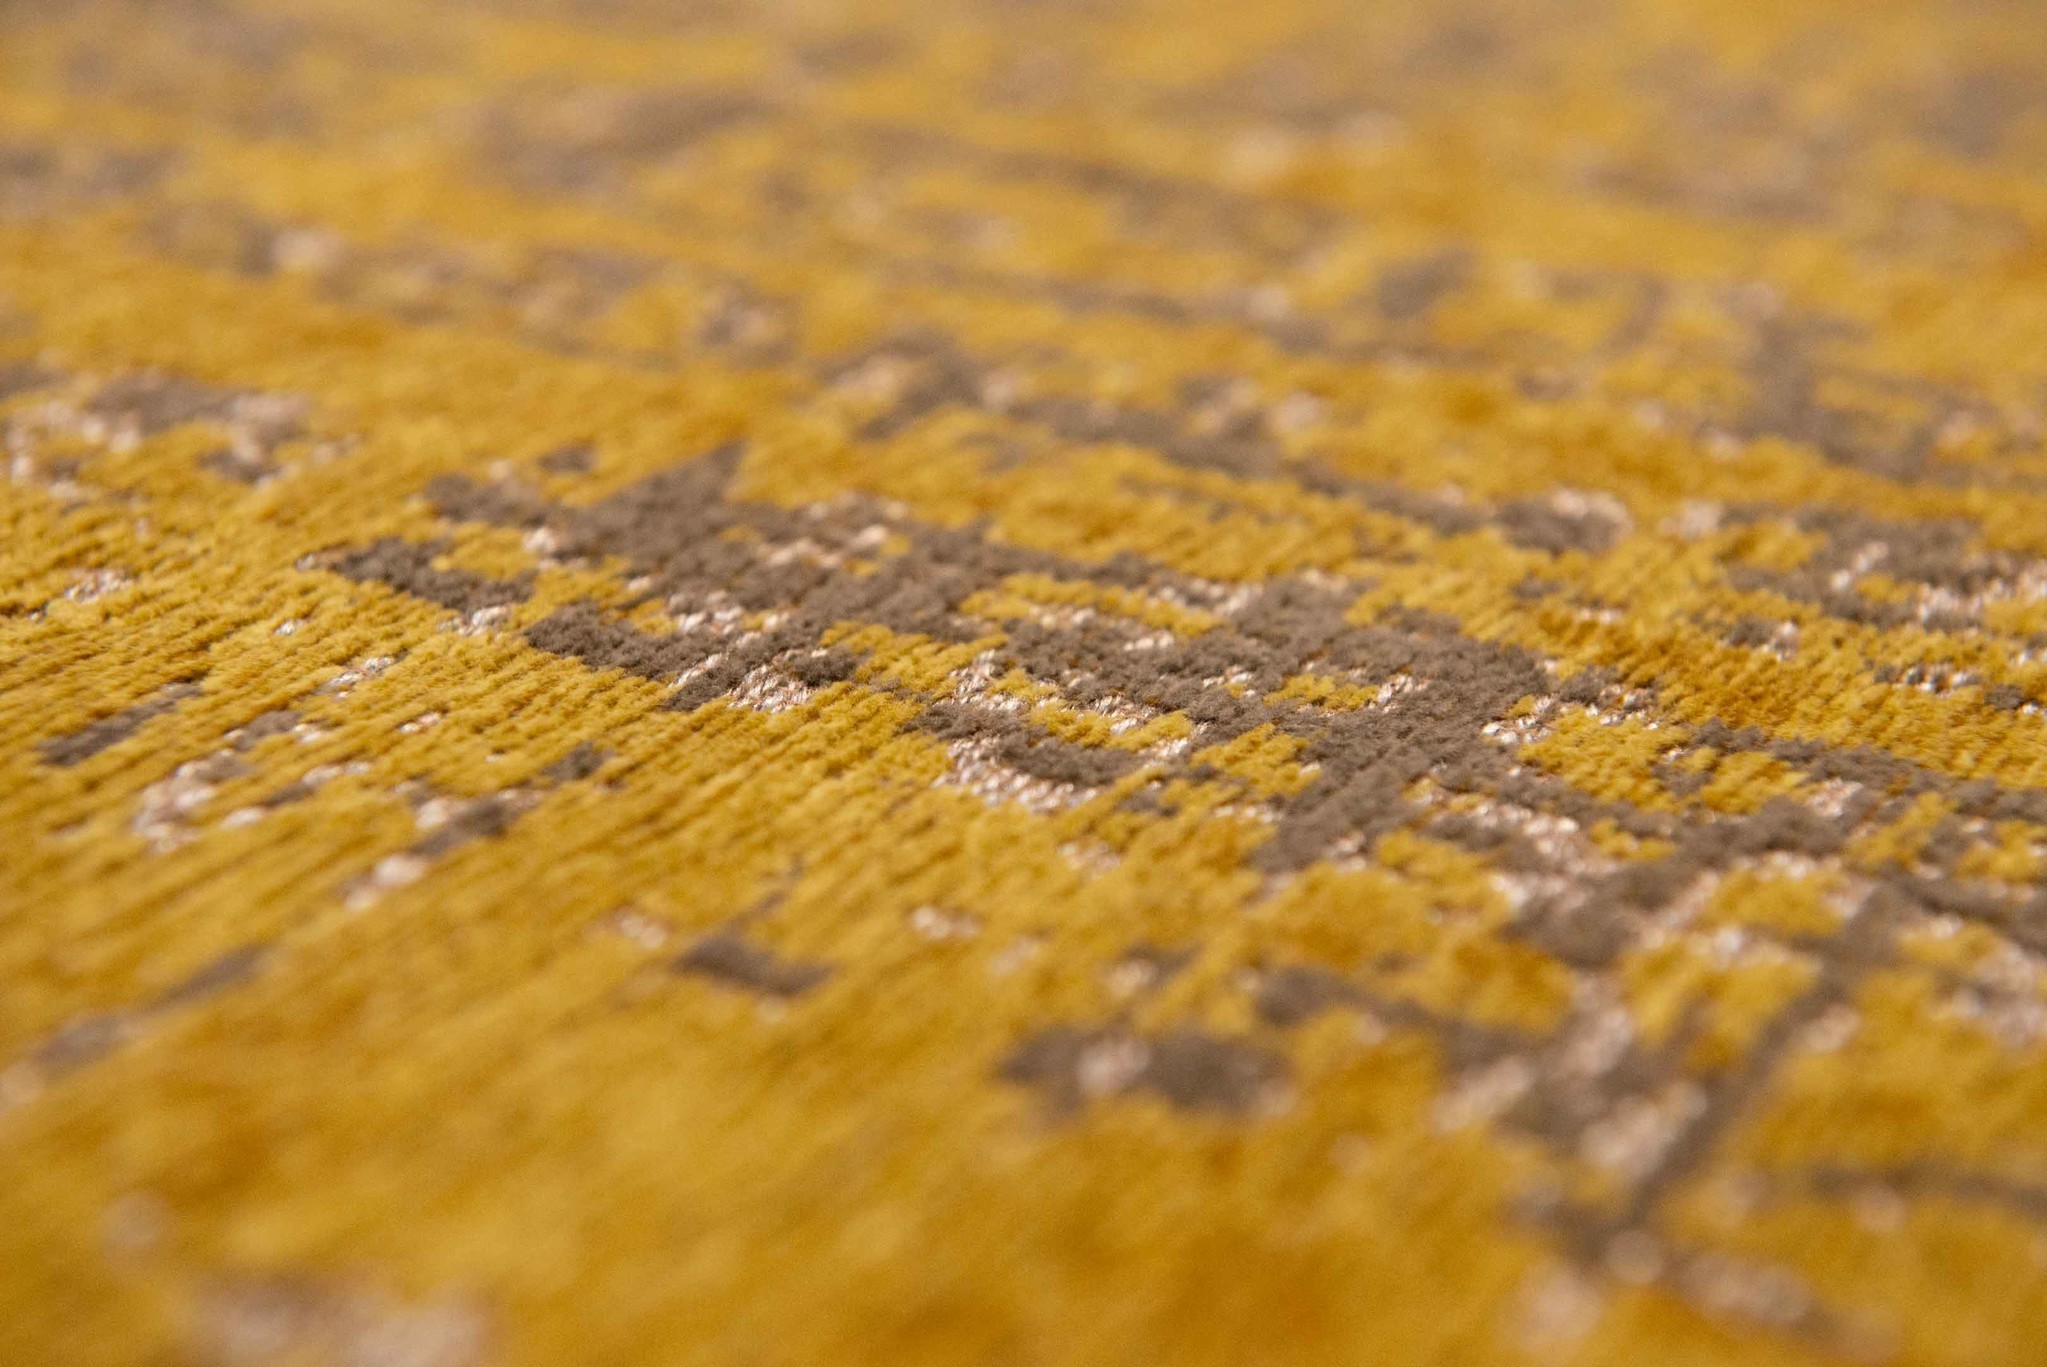 Abstract Gold Belgian Rug ☞ Size: 2' 7" x 5' (80 x 150 cm)